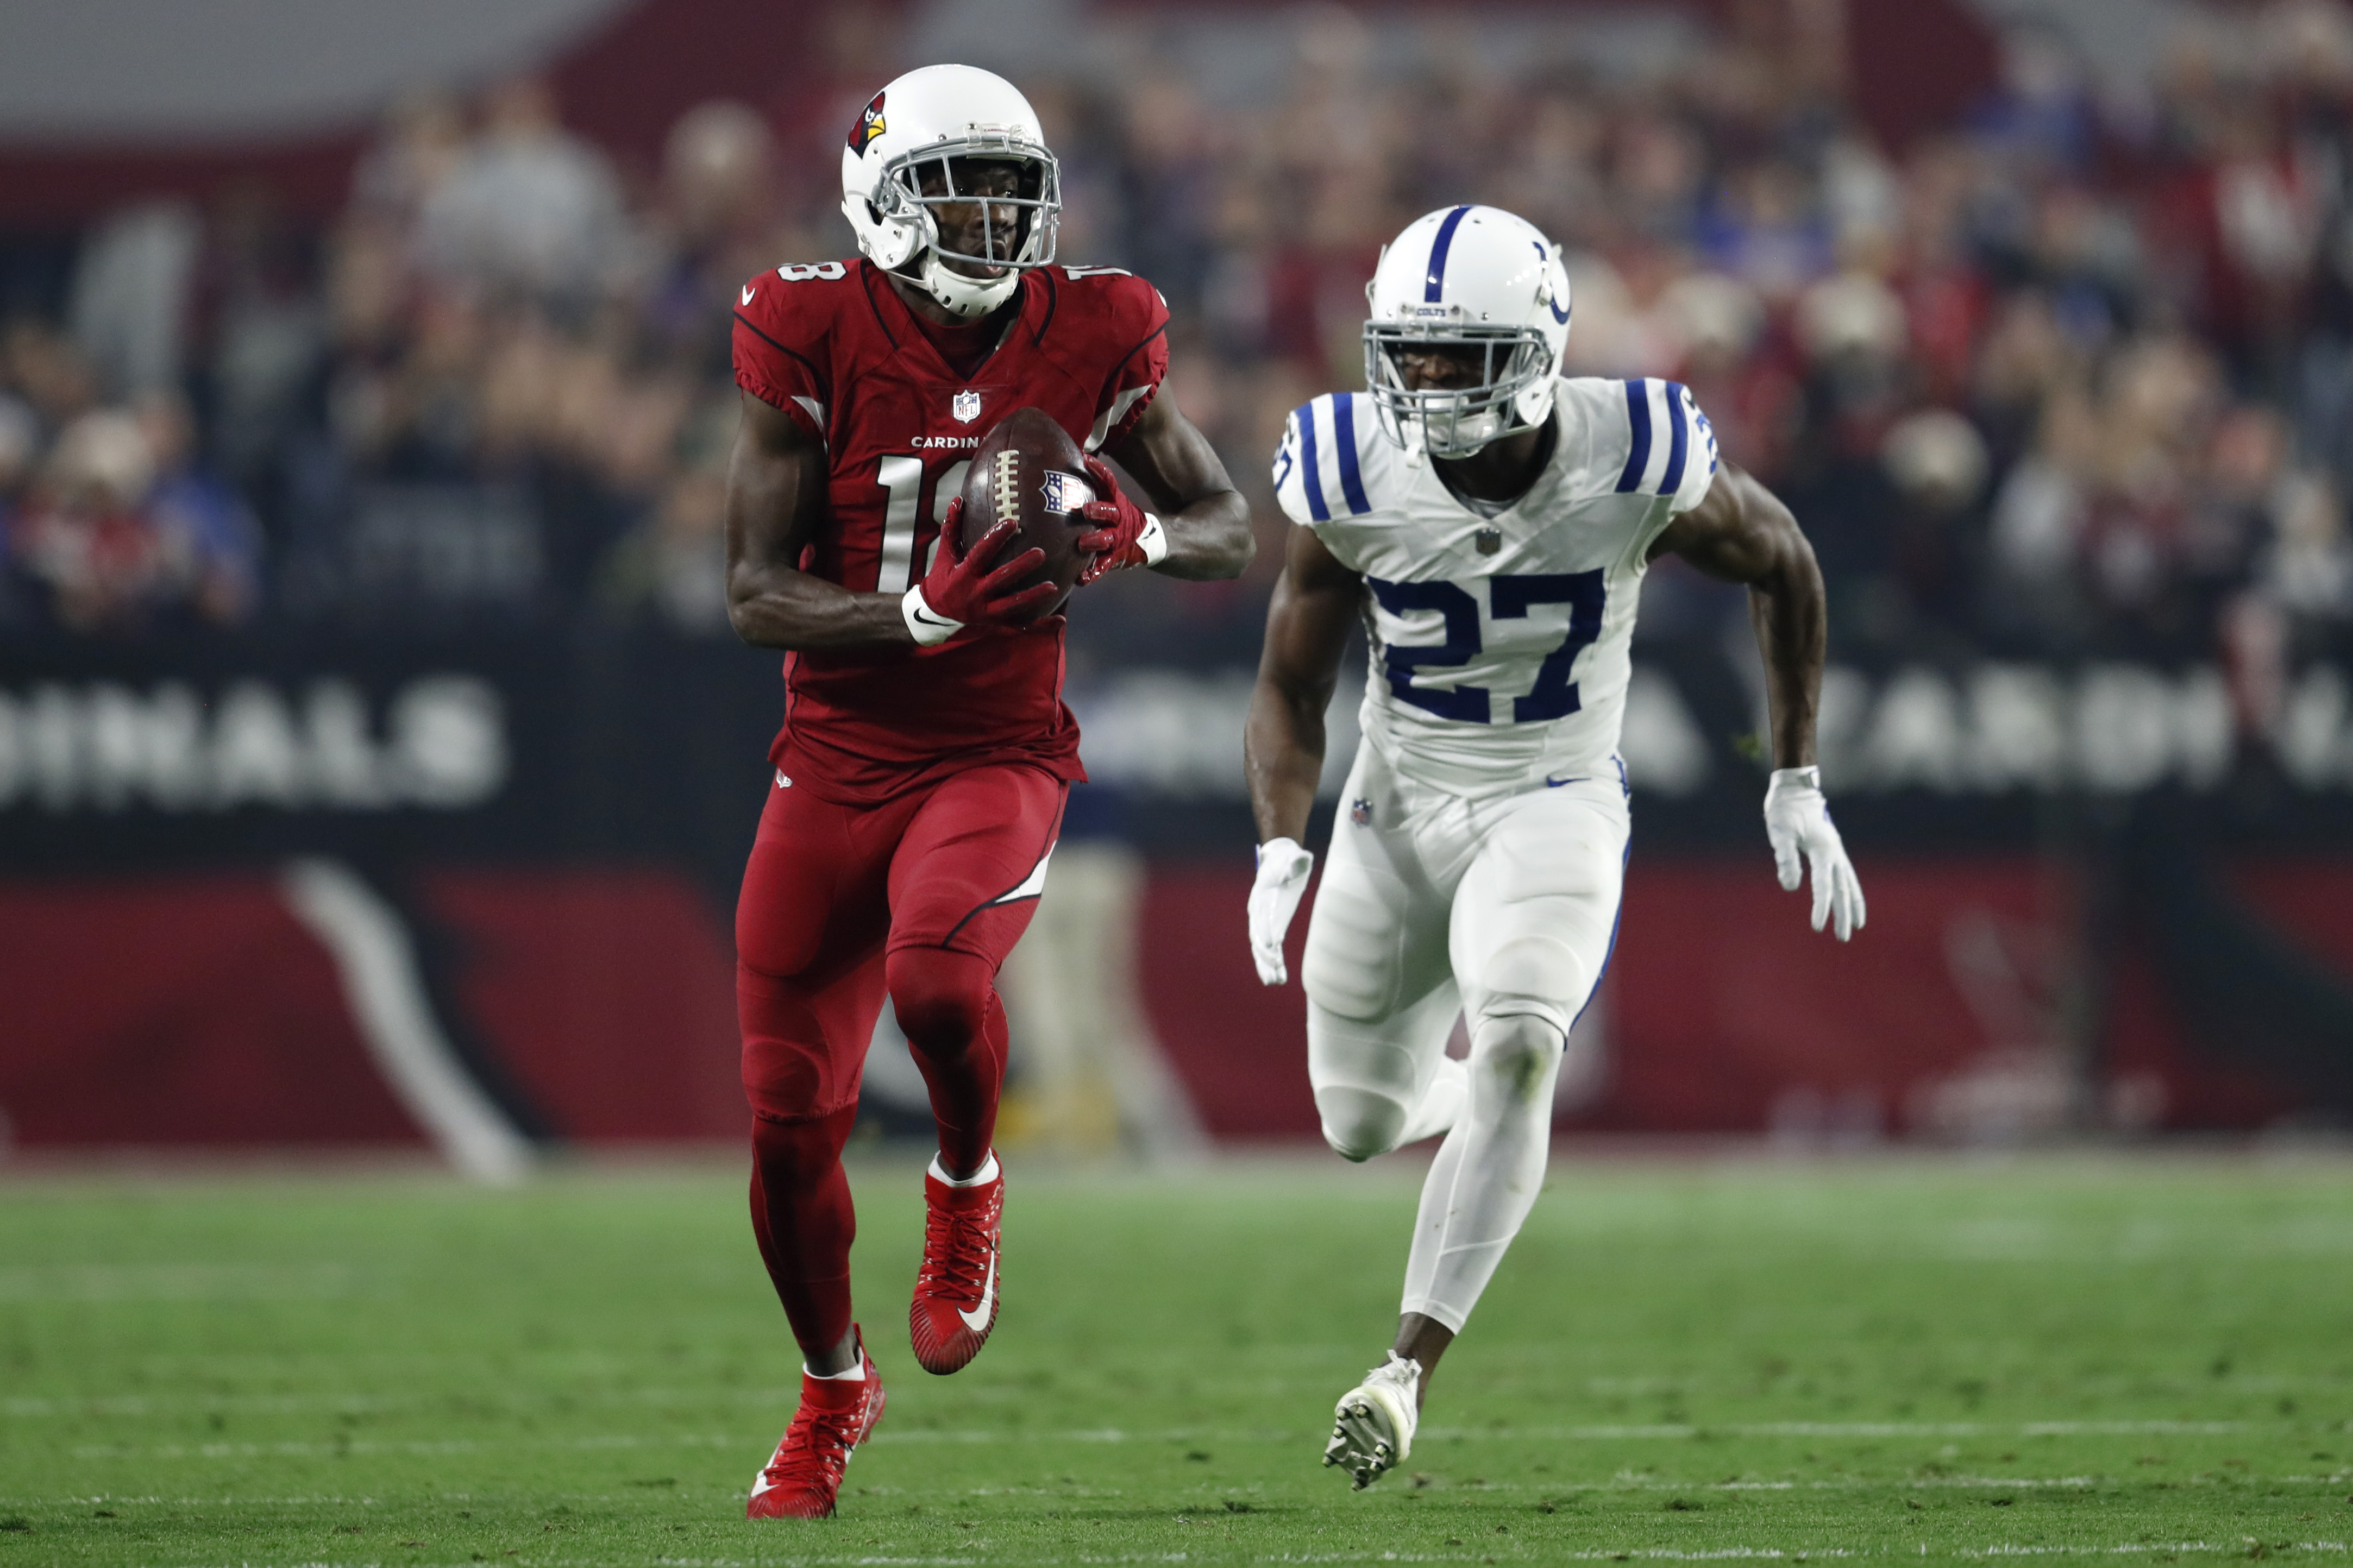 Cornerback Xavier Rhodes #27 of the Indianapolis Colts attempts to tackle wide receiver A.J. Green #18 of the Arizona Cardinals during the second half of the game at State Farm Stadium on December 25, 2021 in Glendale, Arizona. The Colts beat the Cardinals 22-16.